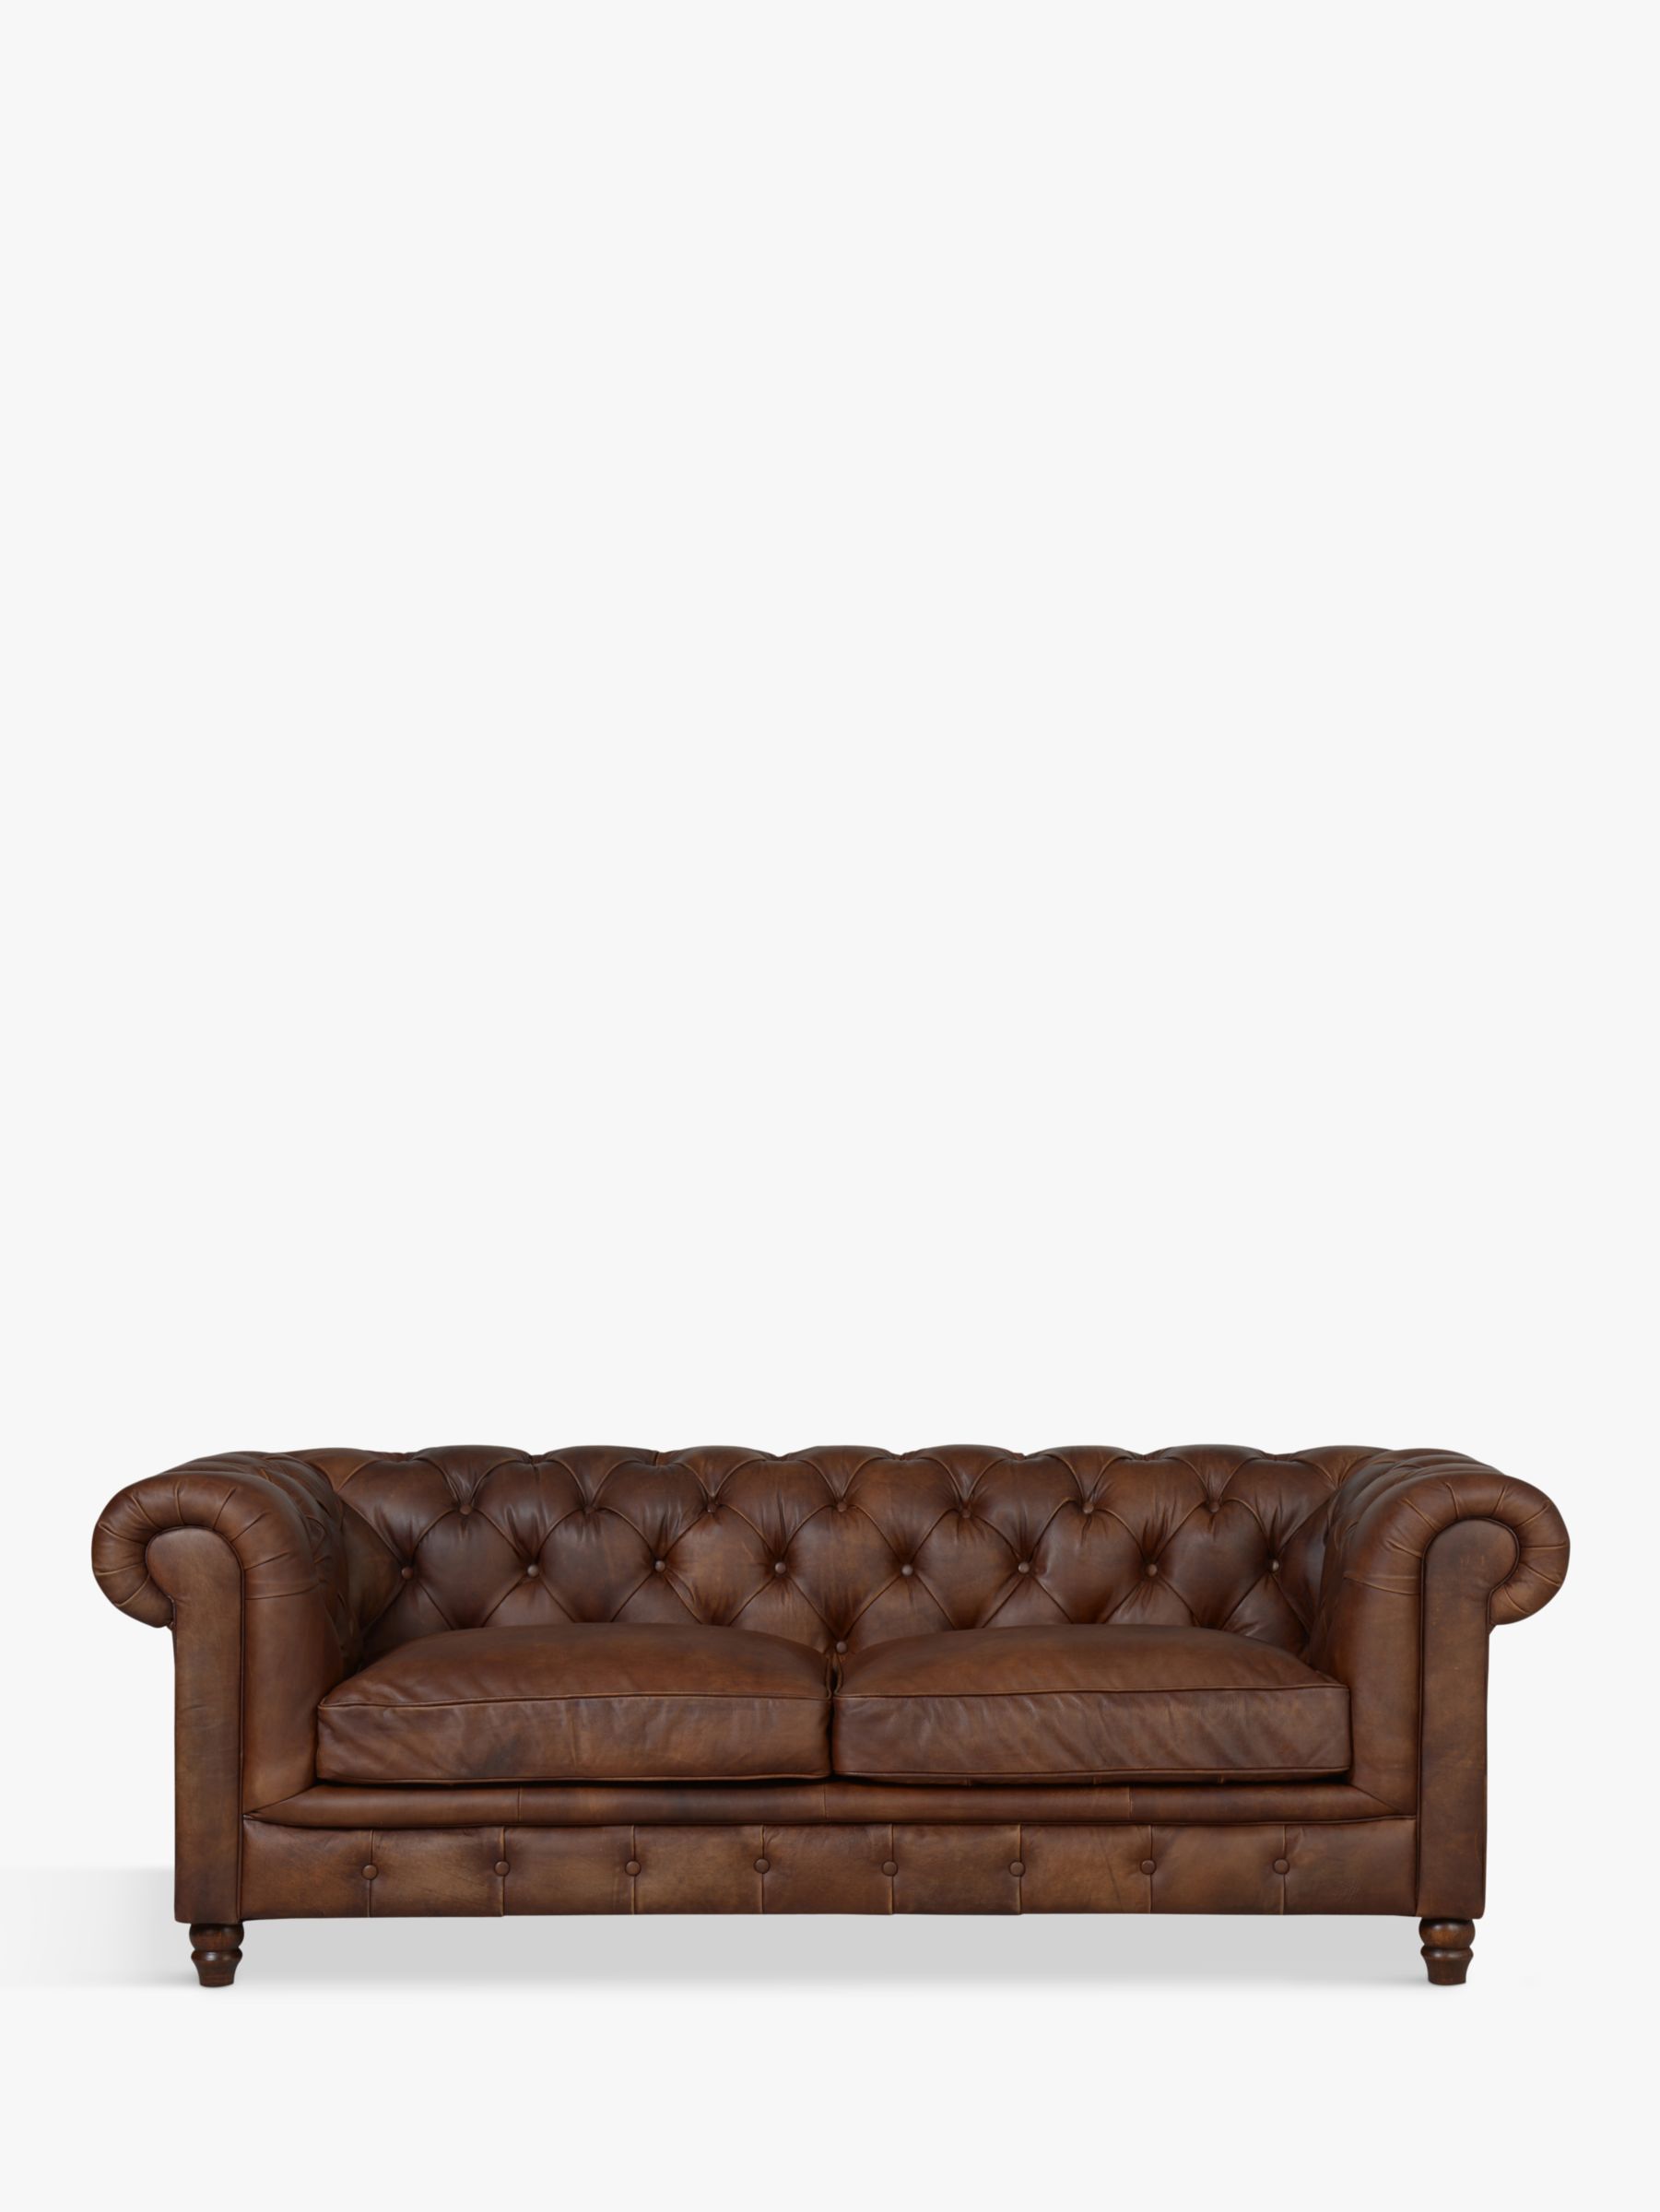 Earle Range, Halo Earle Chesterfield Large 3 Seater Leather Sofa, Antique Whisky